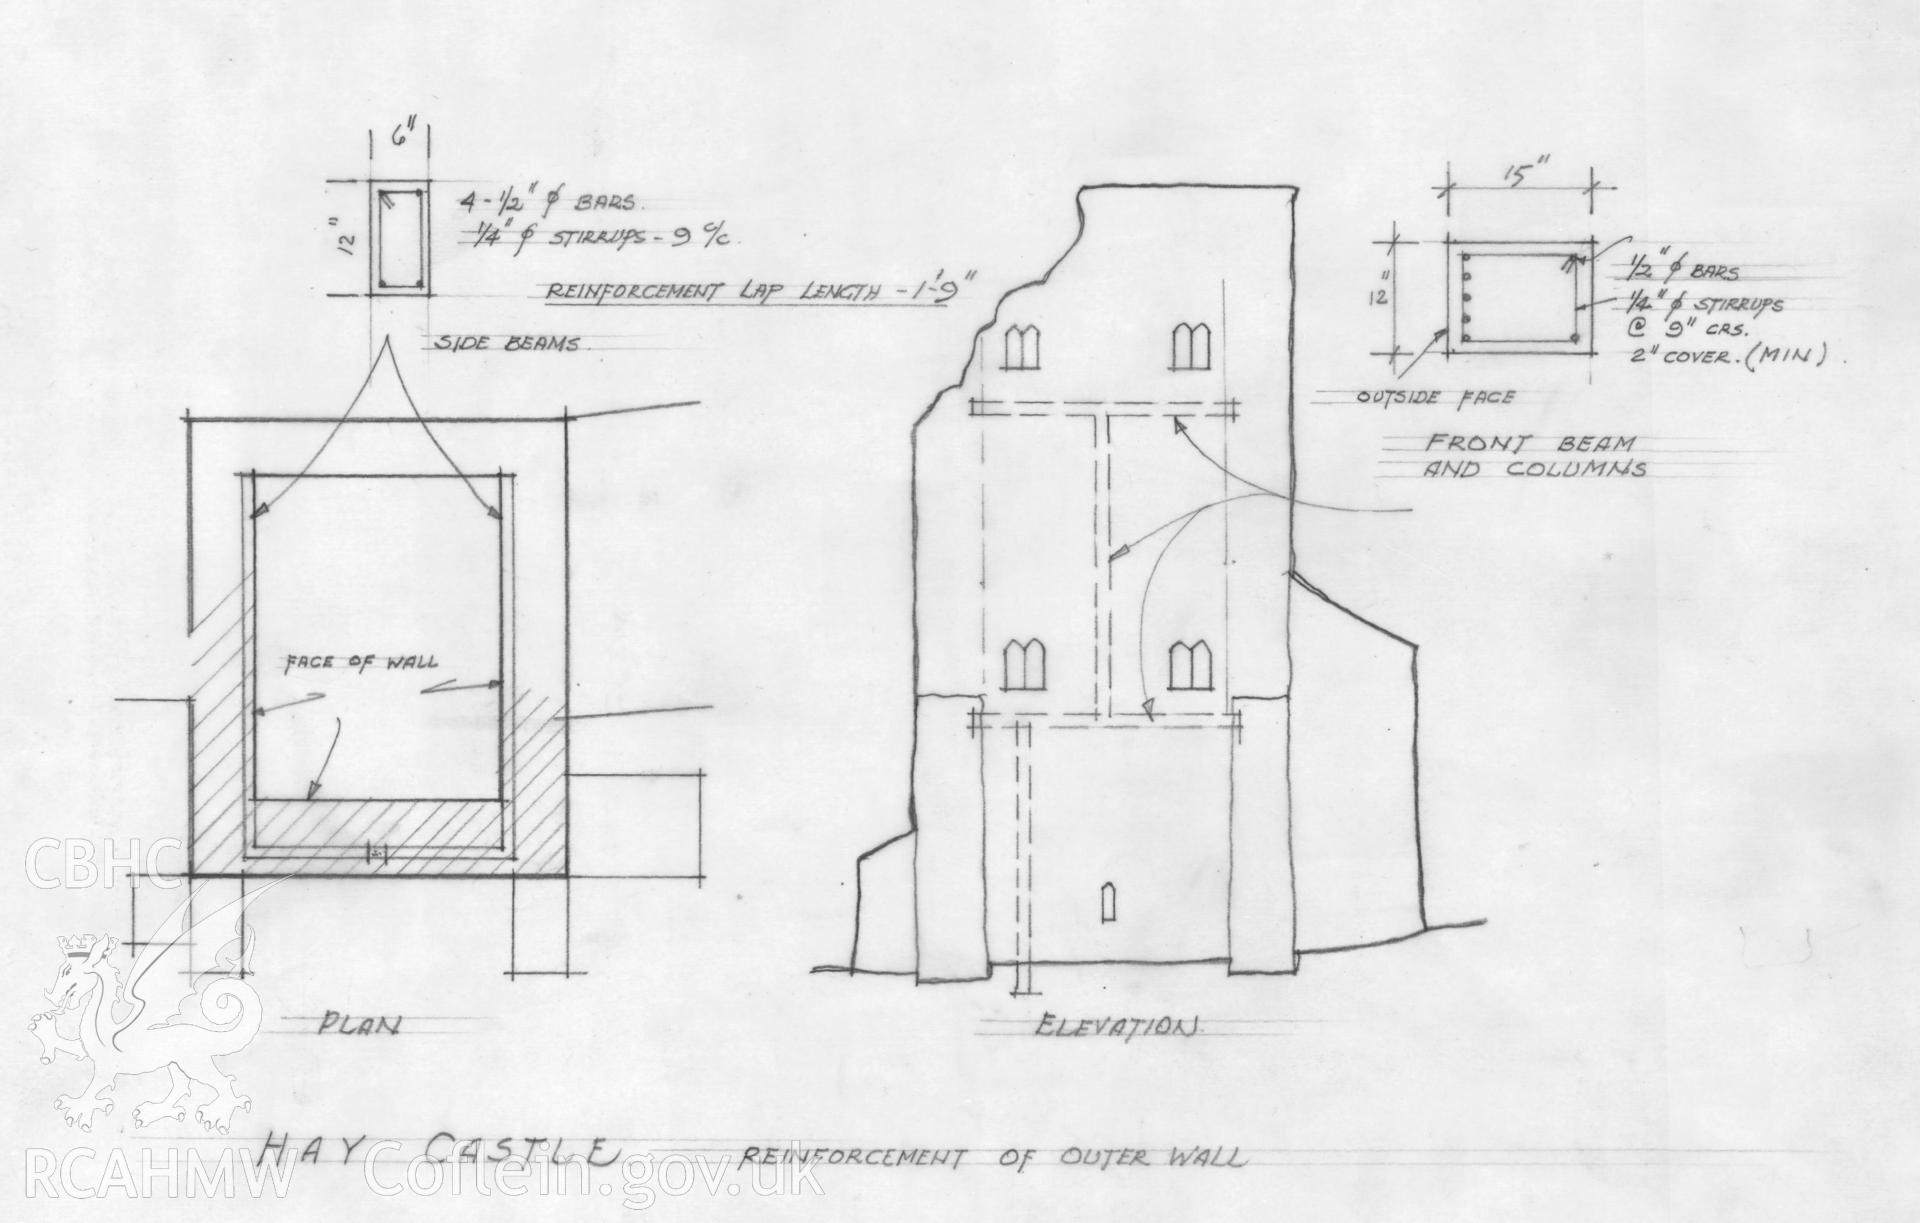 Sketch elevation and plan of Hay Castle, showing the reinforcement of the outer wall, pencil on tracing paper.